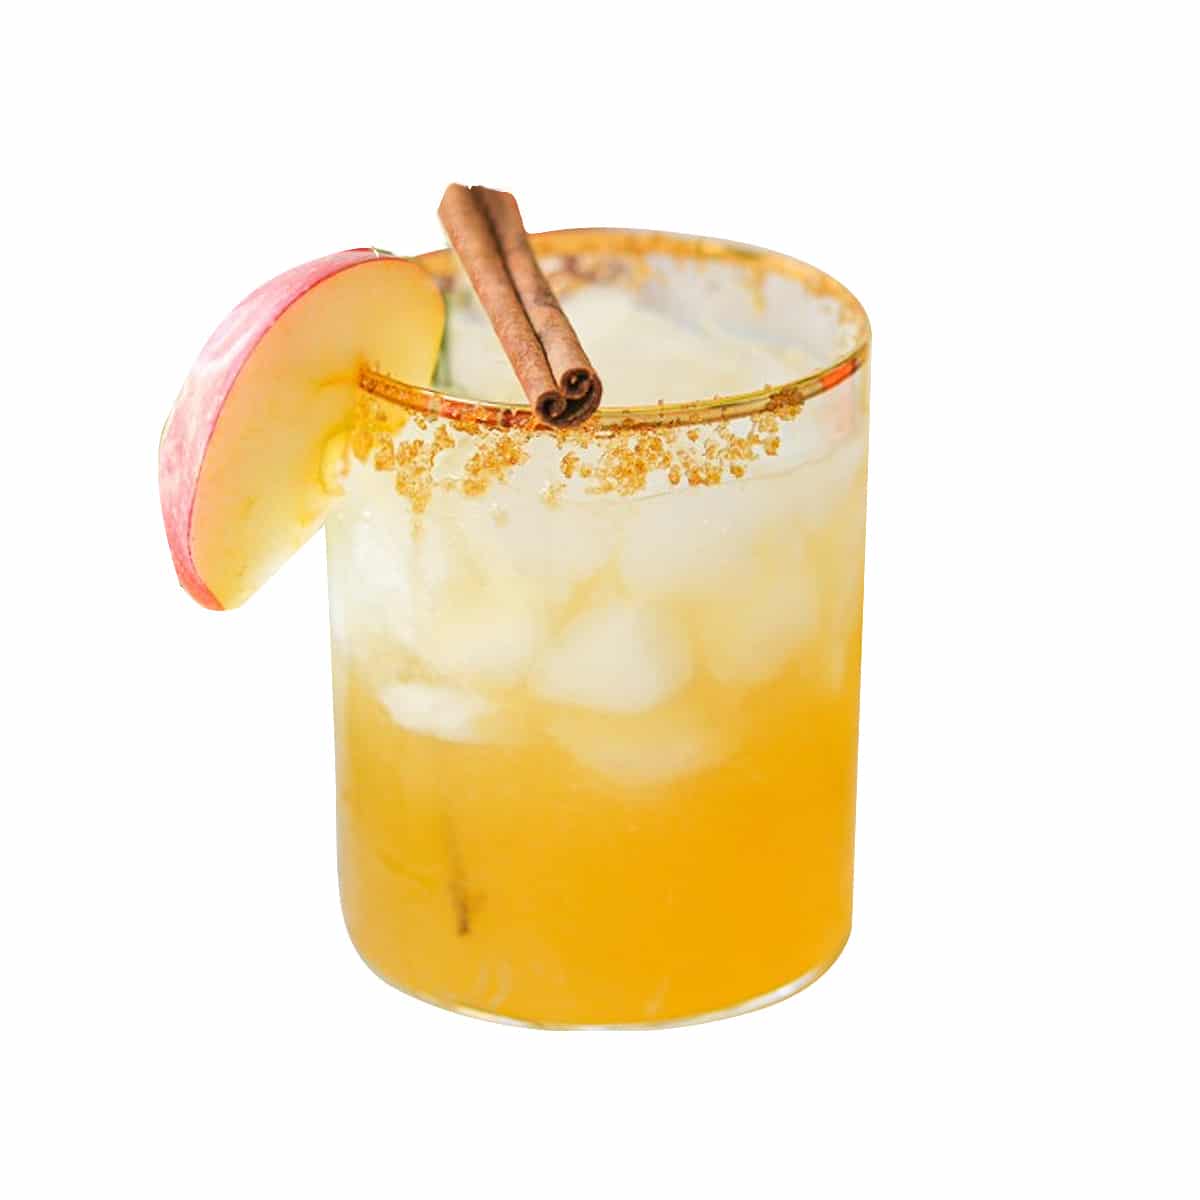 (Out of Season)Spiced Apple Margarita - 1.5oz Tequila, .75oz Spiced Apple Syrup, .75oz Lime Juice, Cinnamon Stick